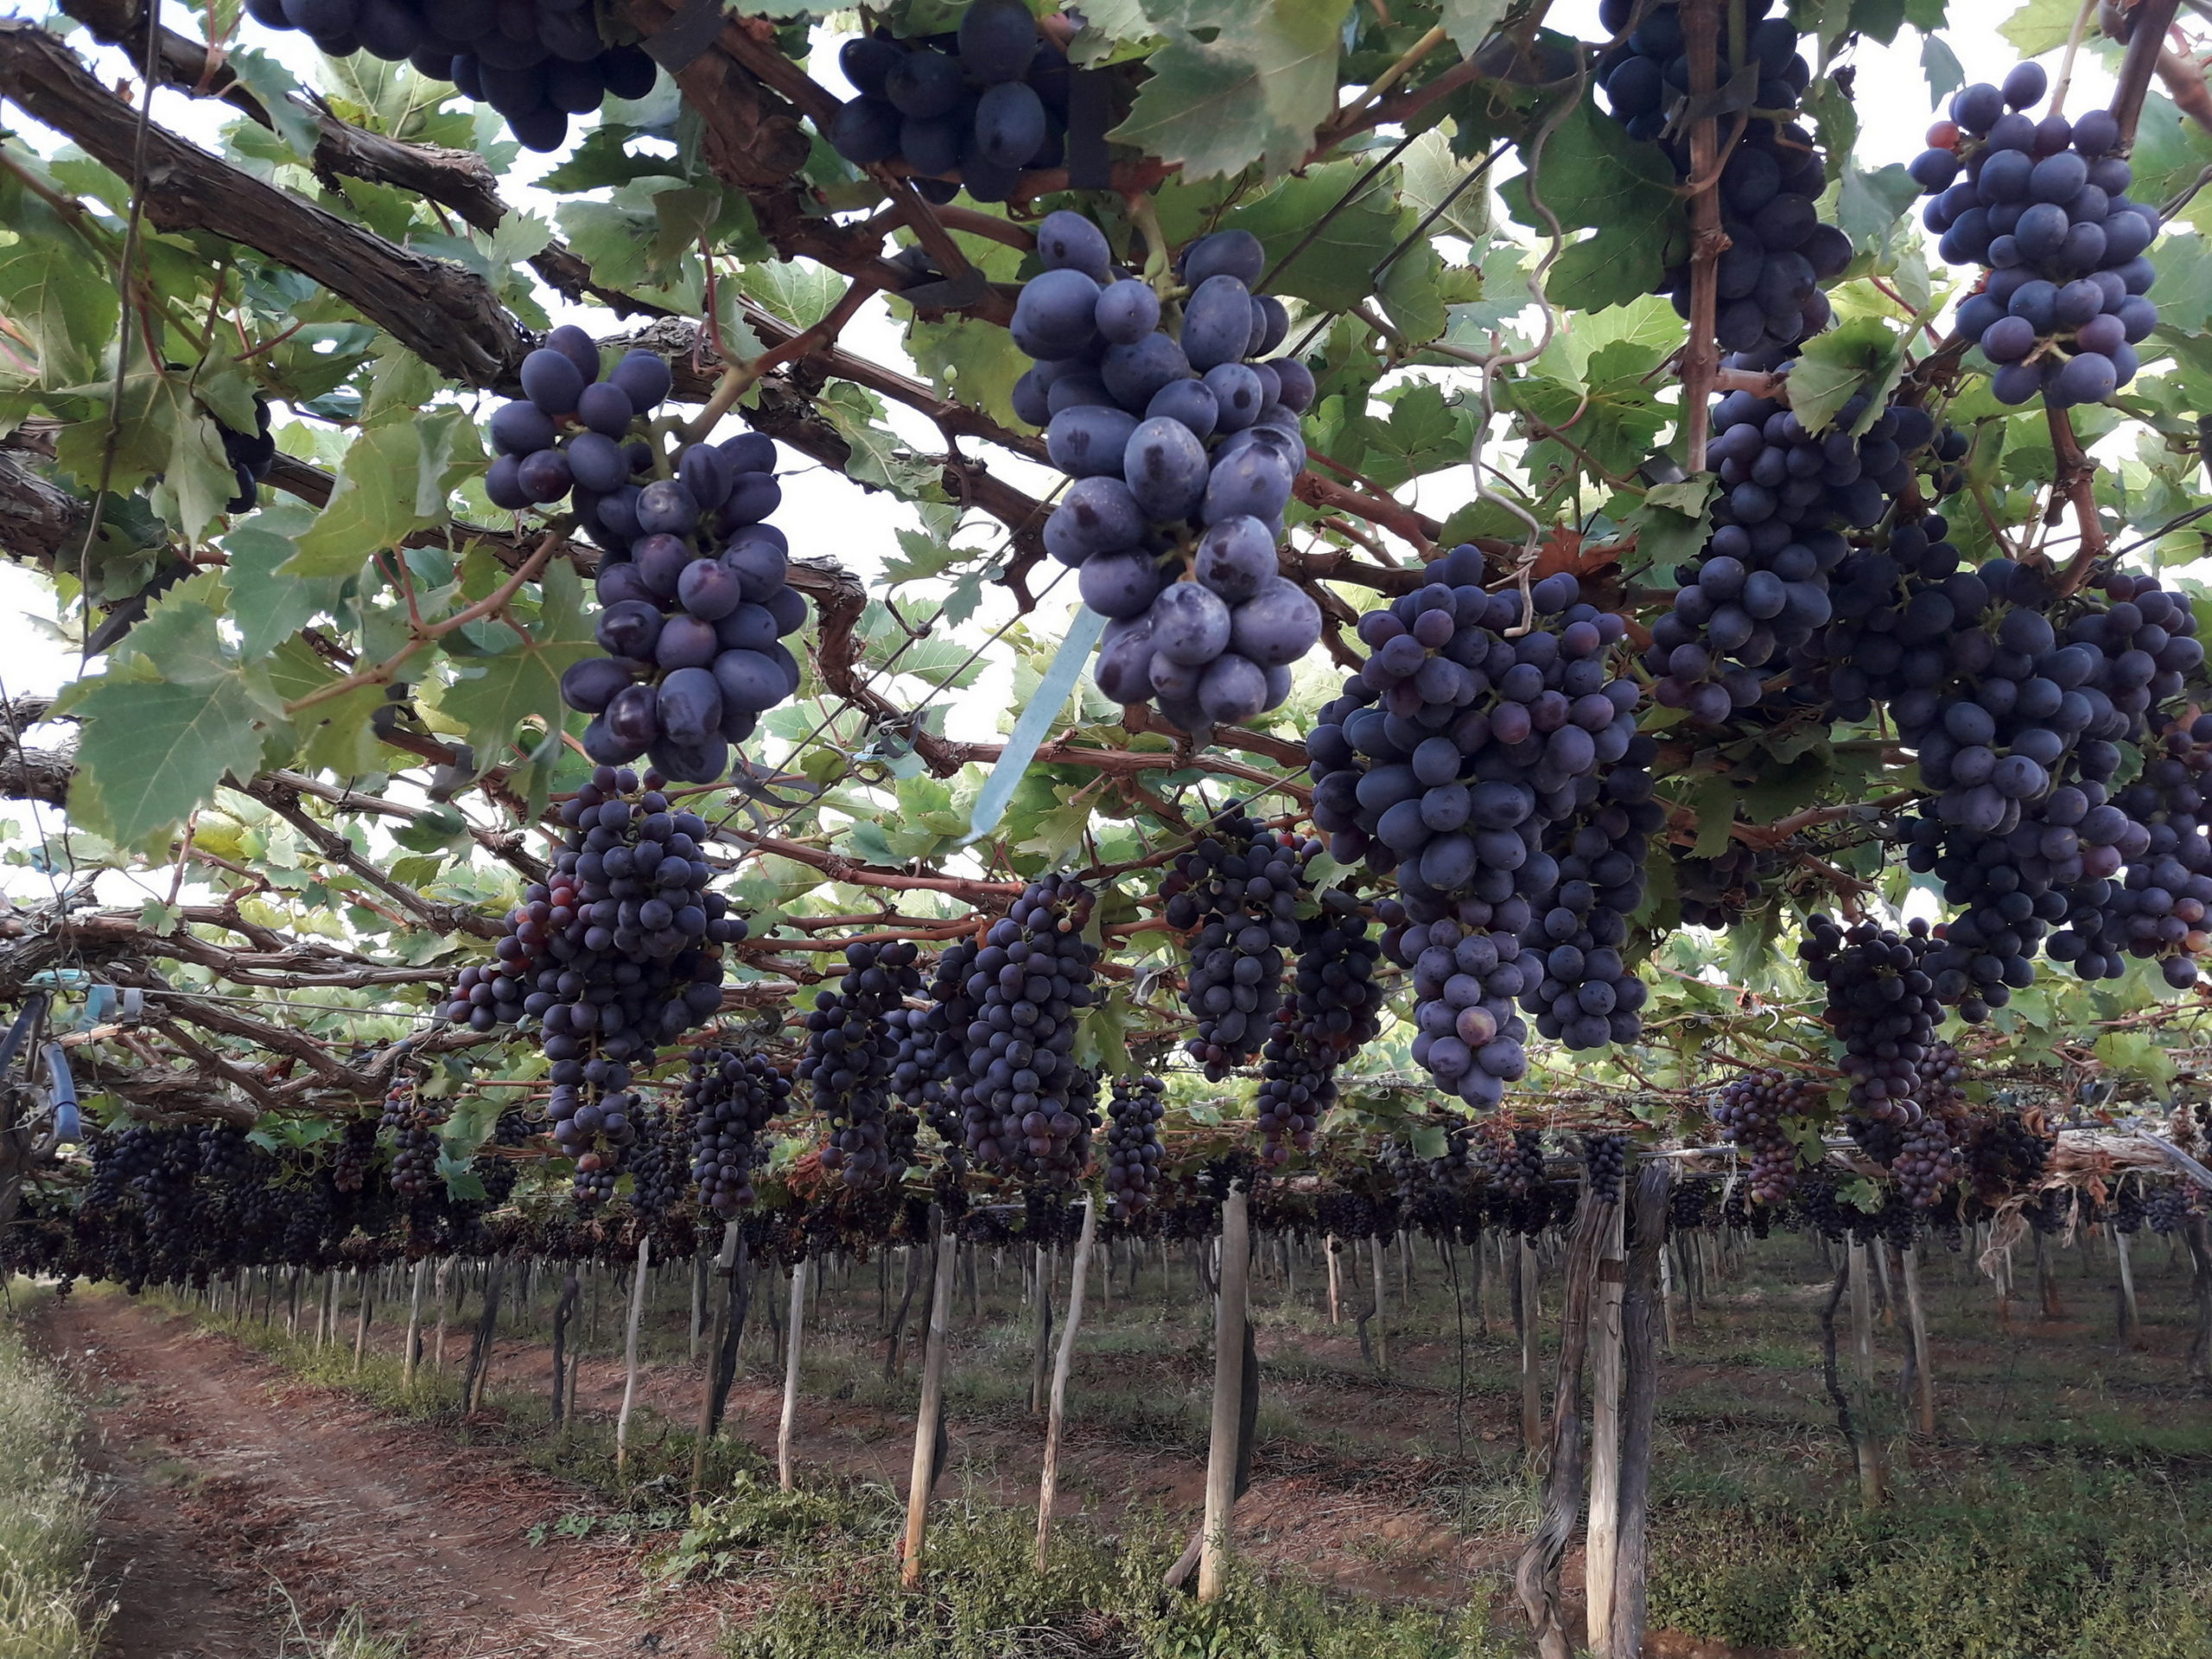 Brazil is slowly becoming a serious wine-growing country.